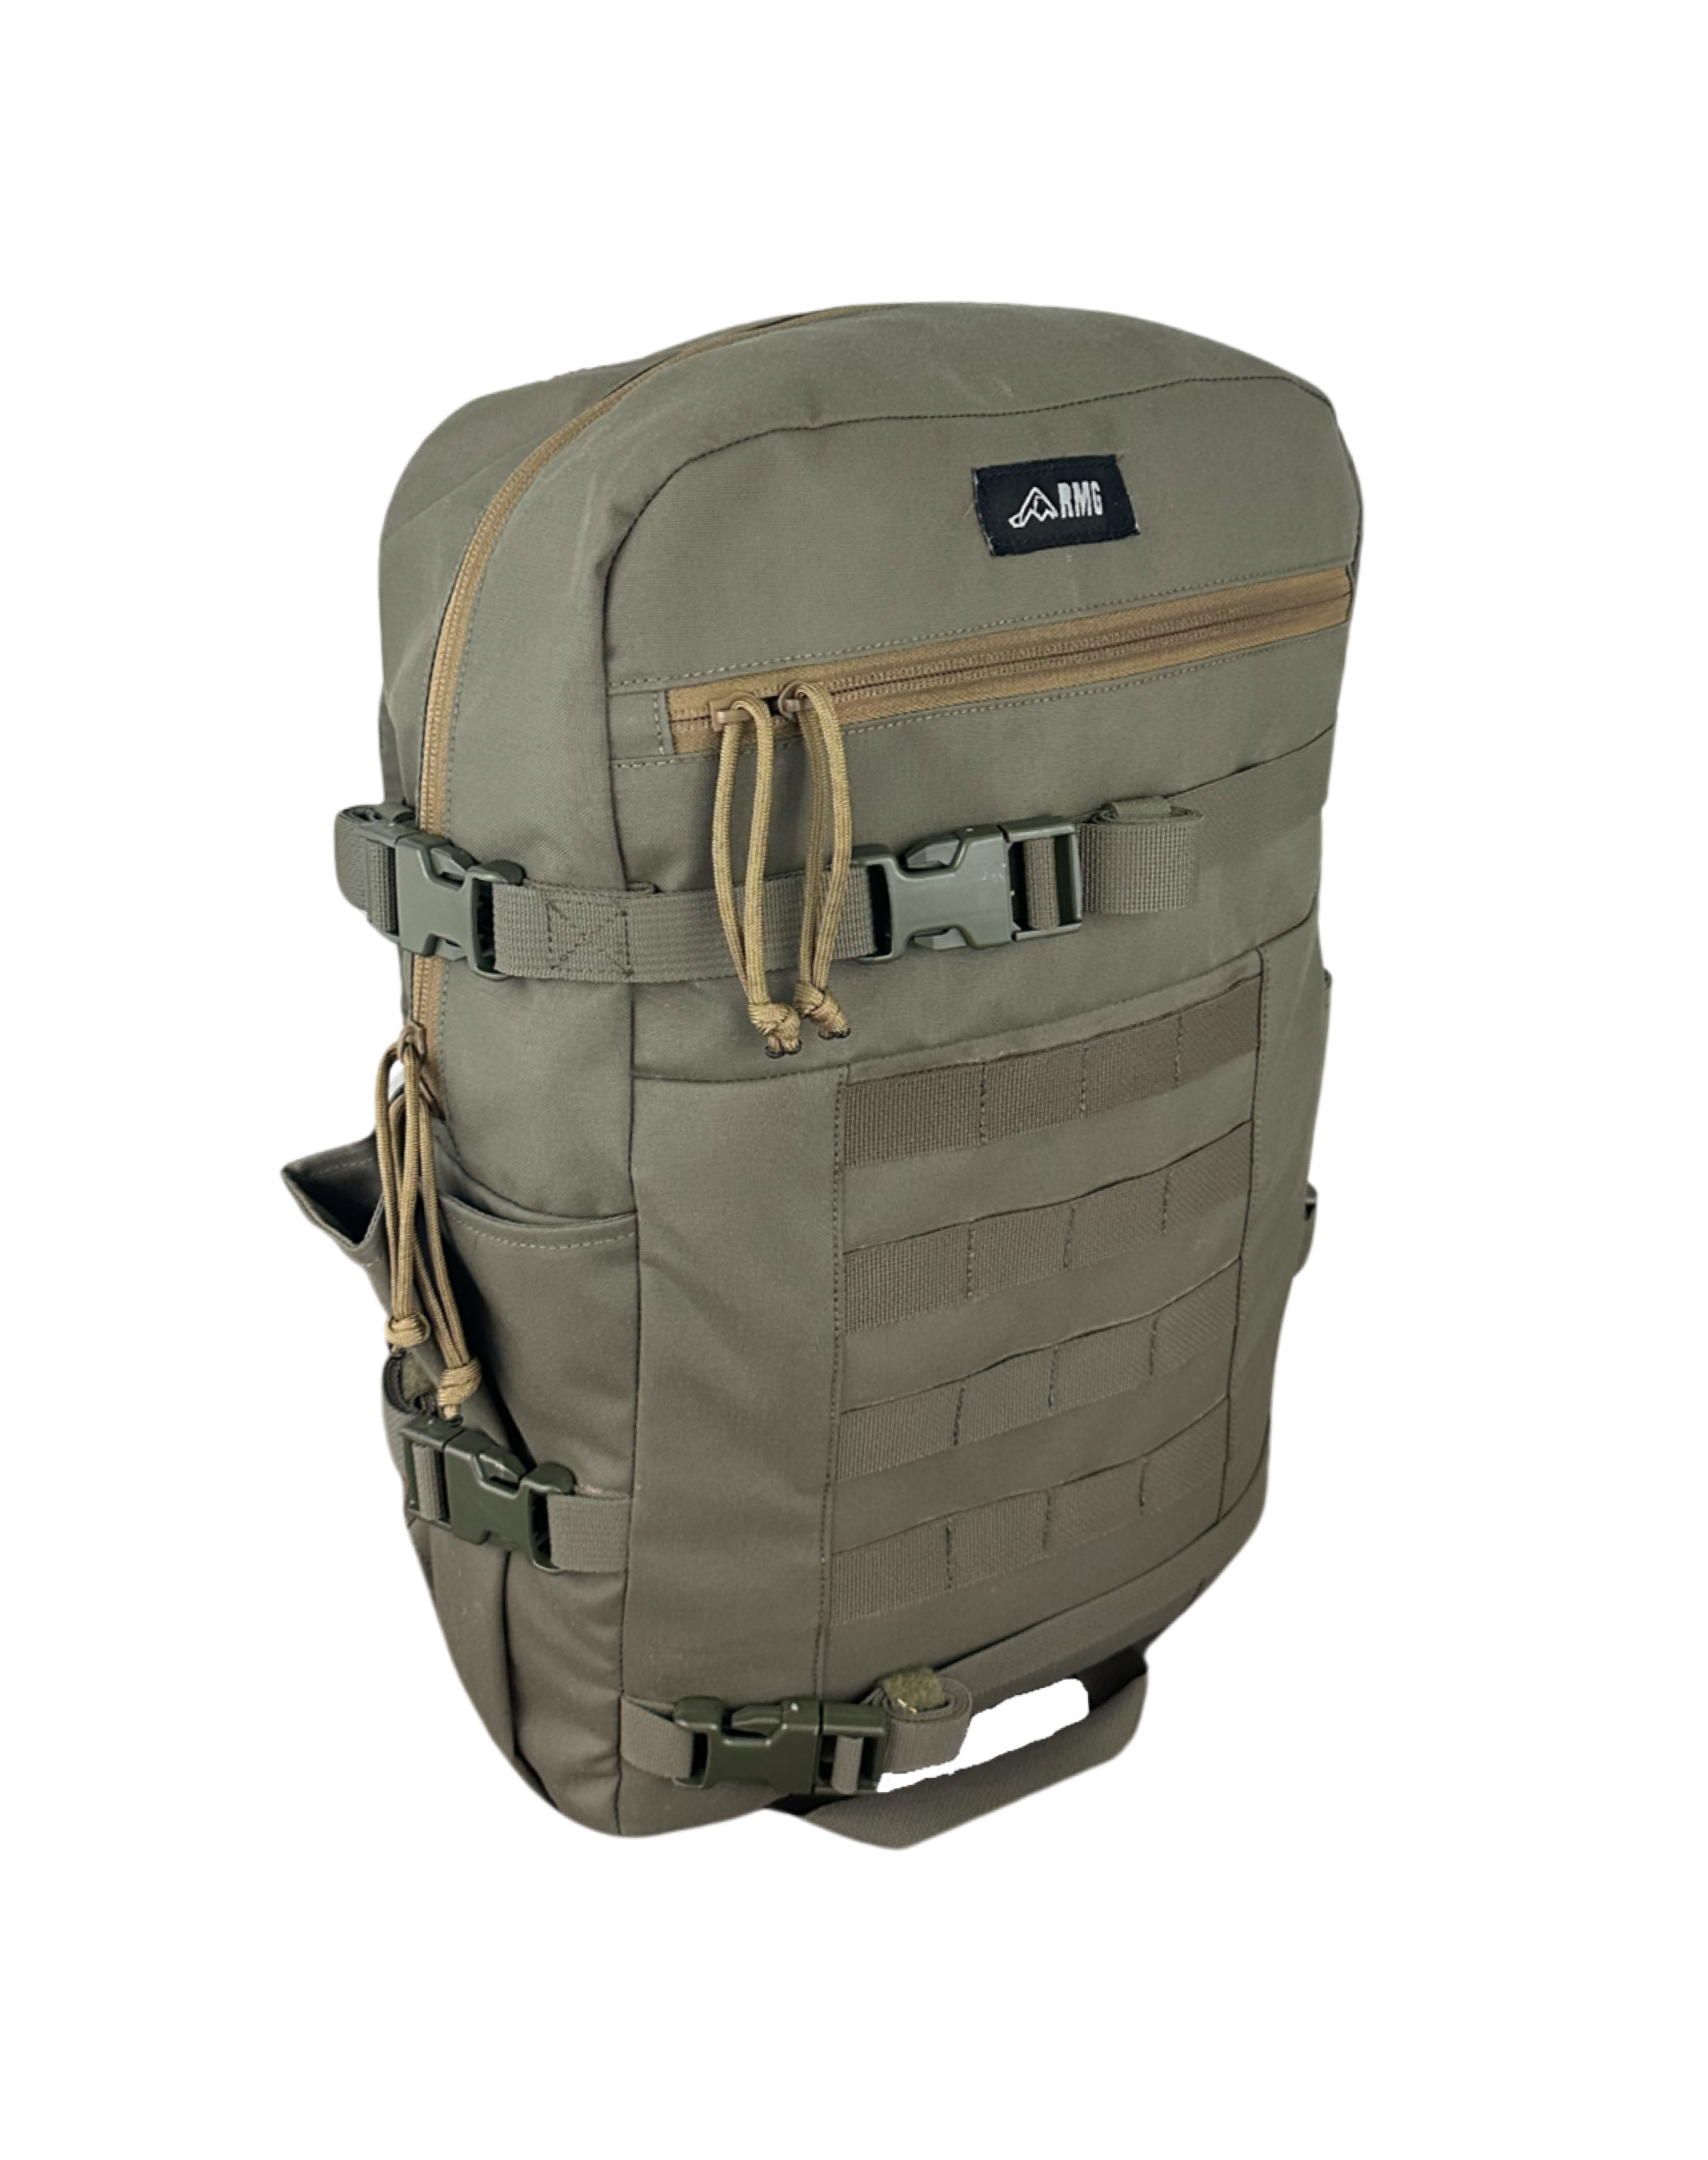 Ruckmule Koda day pack backpack front panel and side panel view 